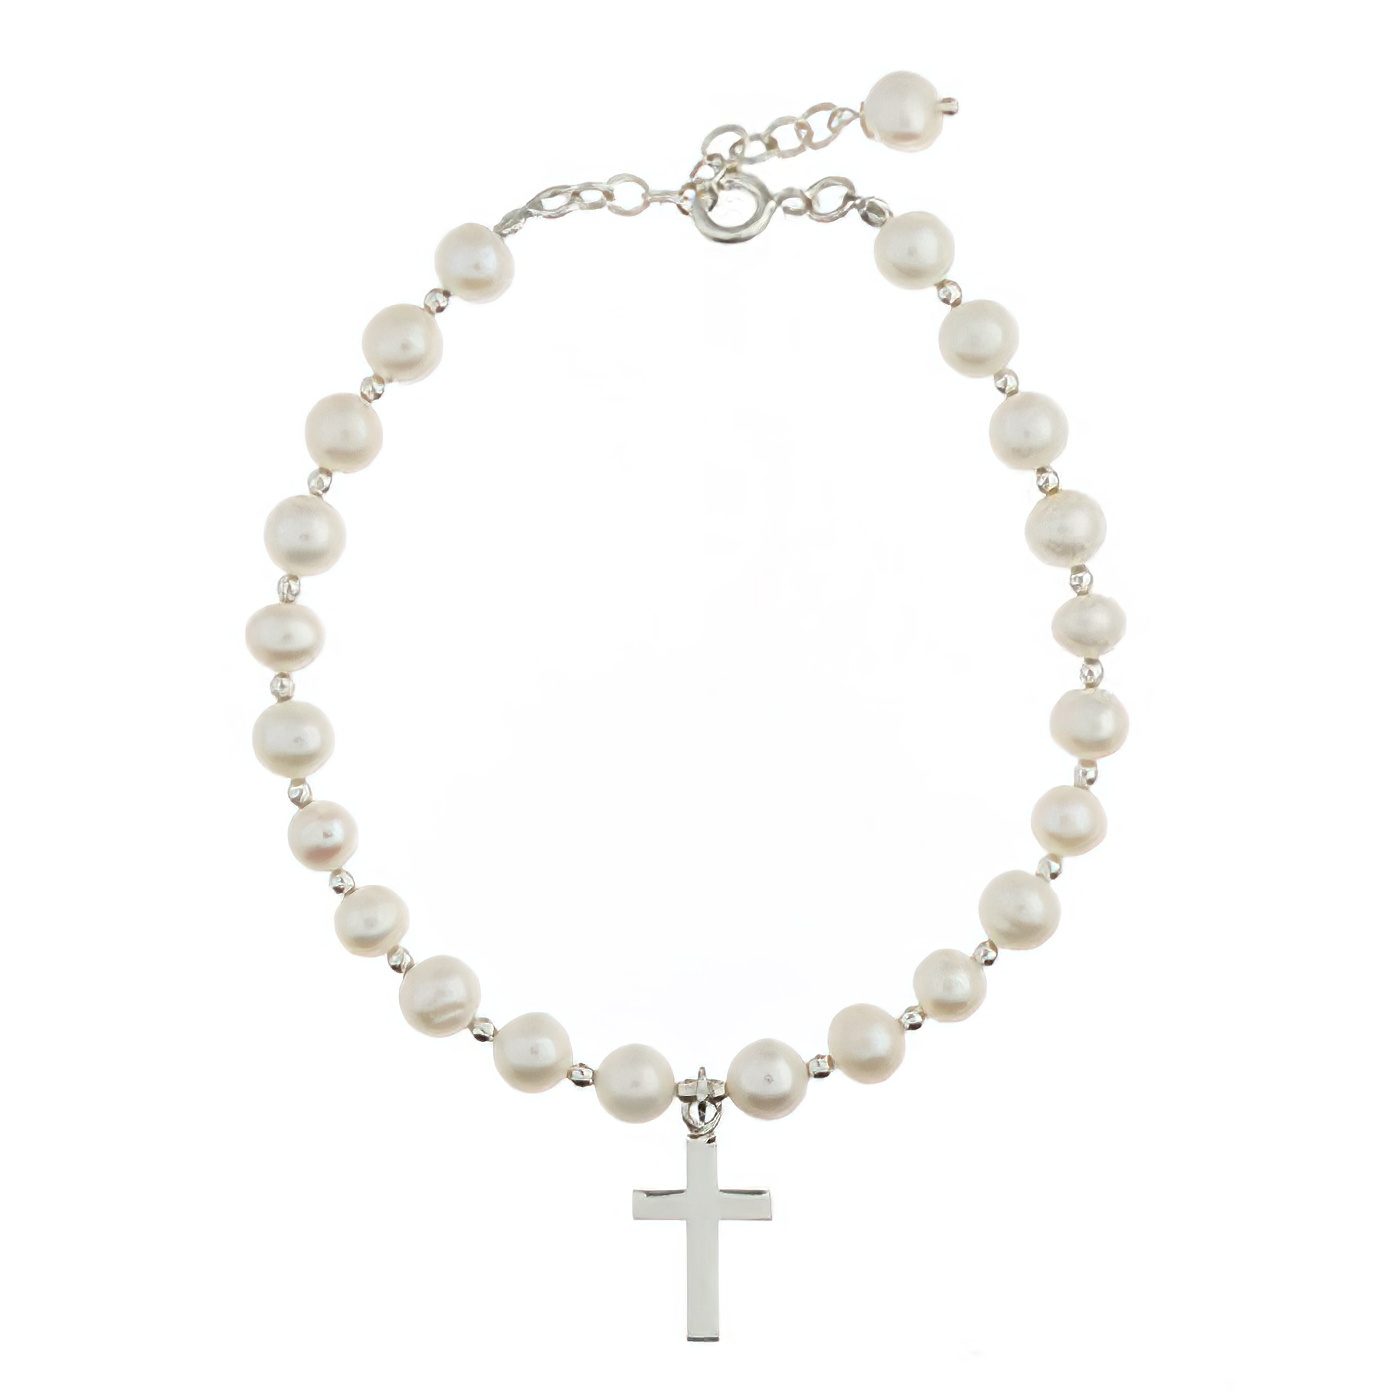 Freshwater Pearl & Silver Beads Bracelet with Cross Charm 